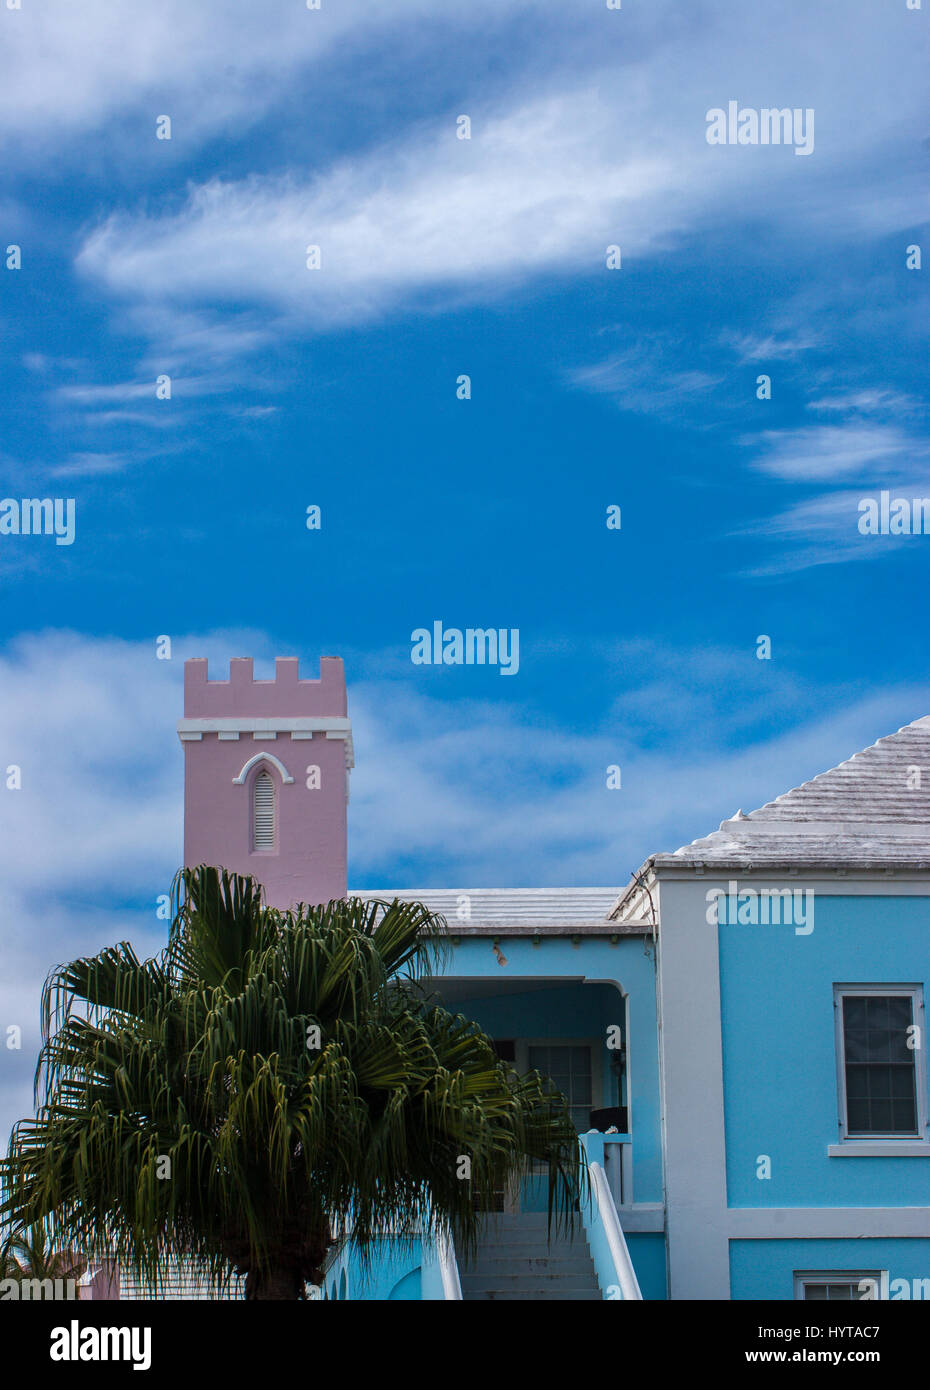 Dwelling house in St George, Bermuda with pink castle like structure. Stock Photo